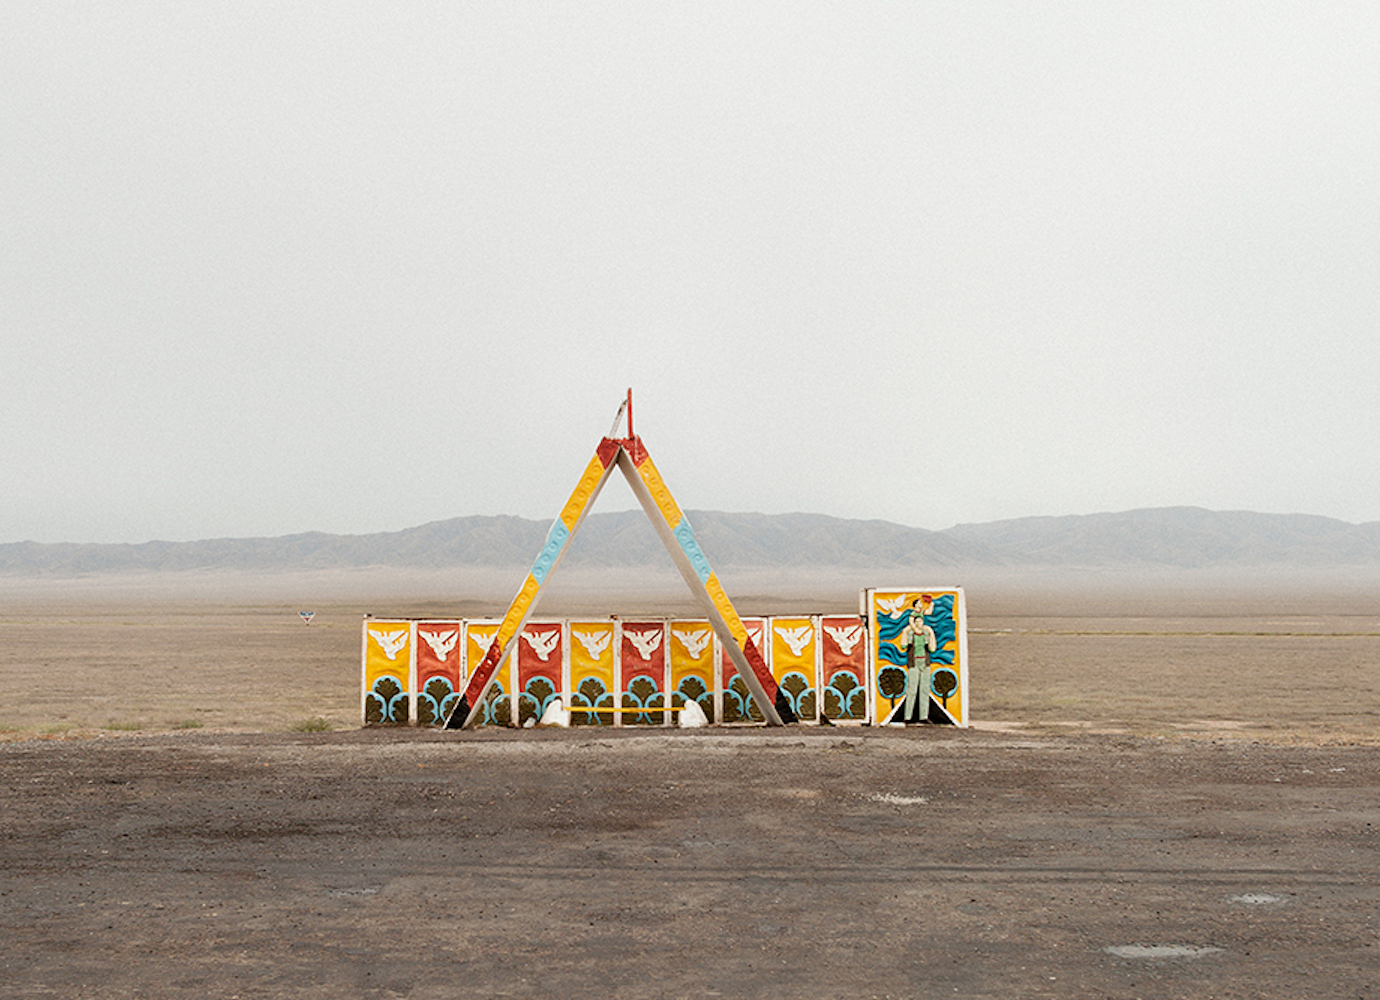 Lose yourself in the fascinating world of Soviet bus stops with @herwigphoto